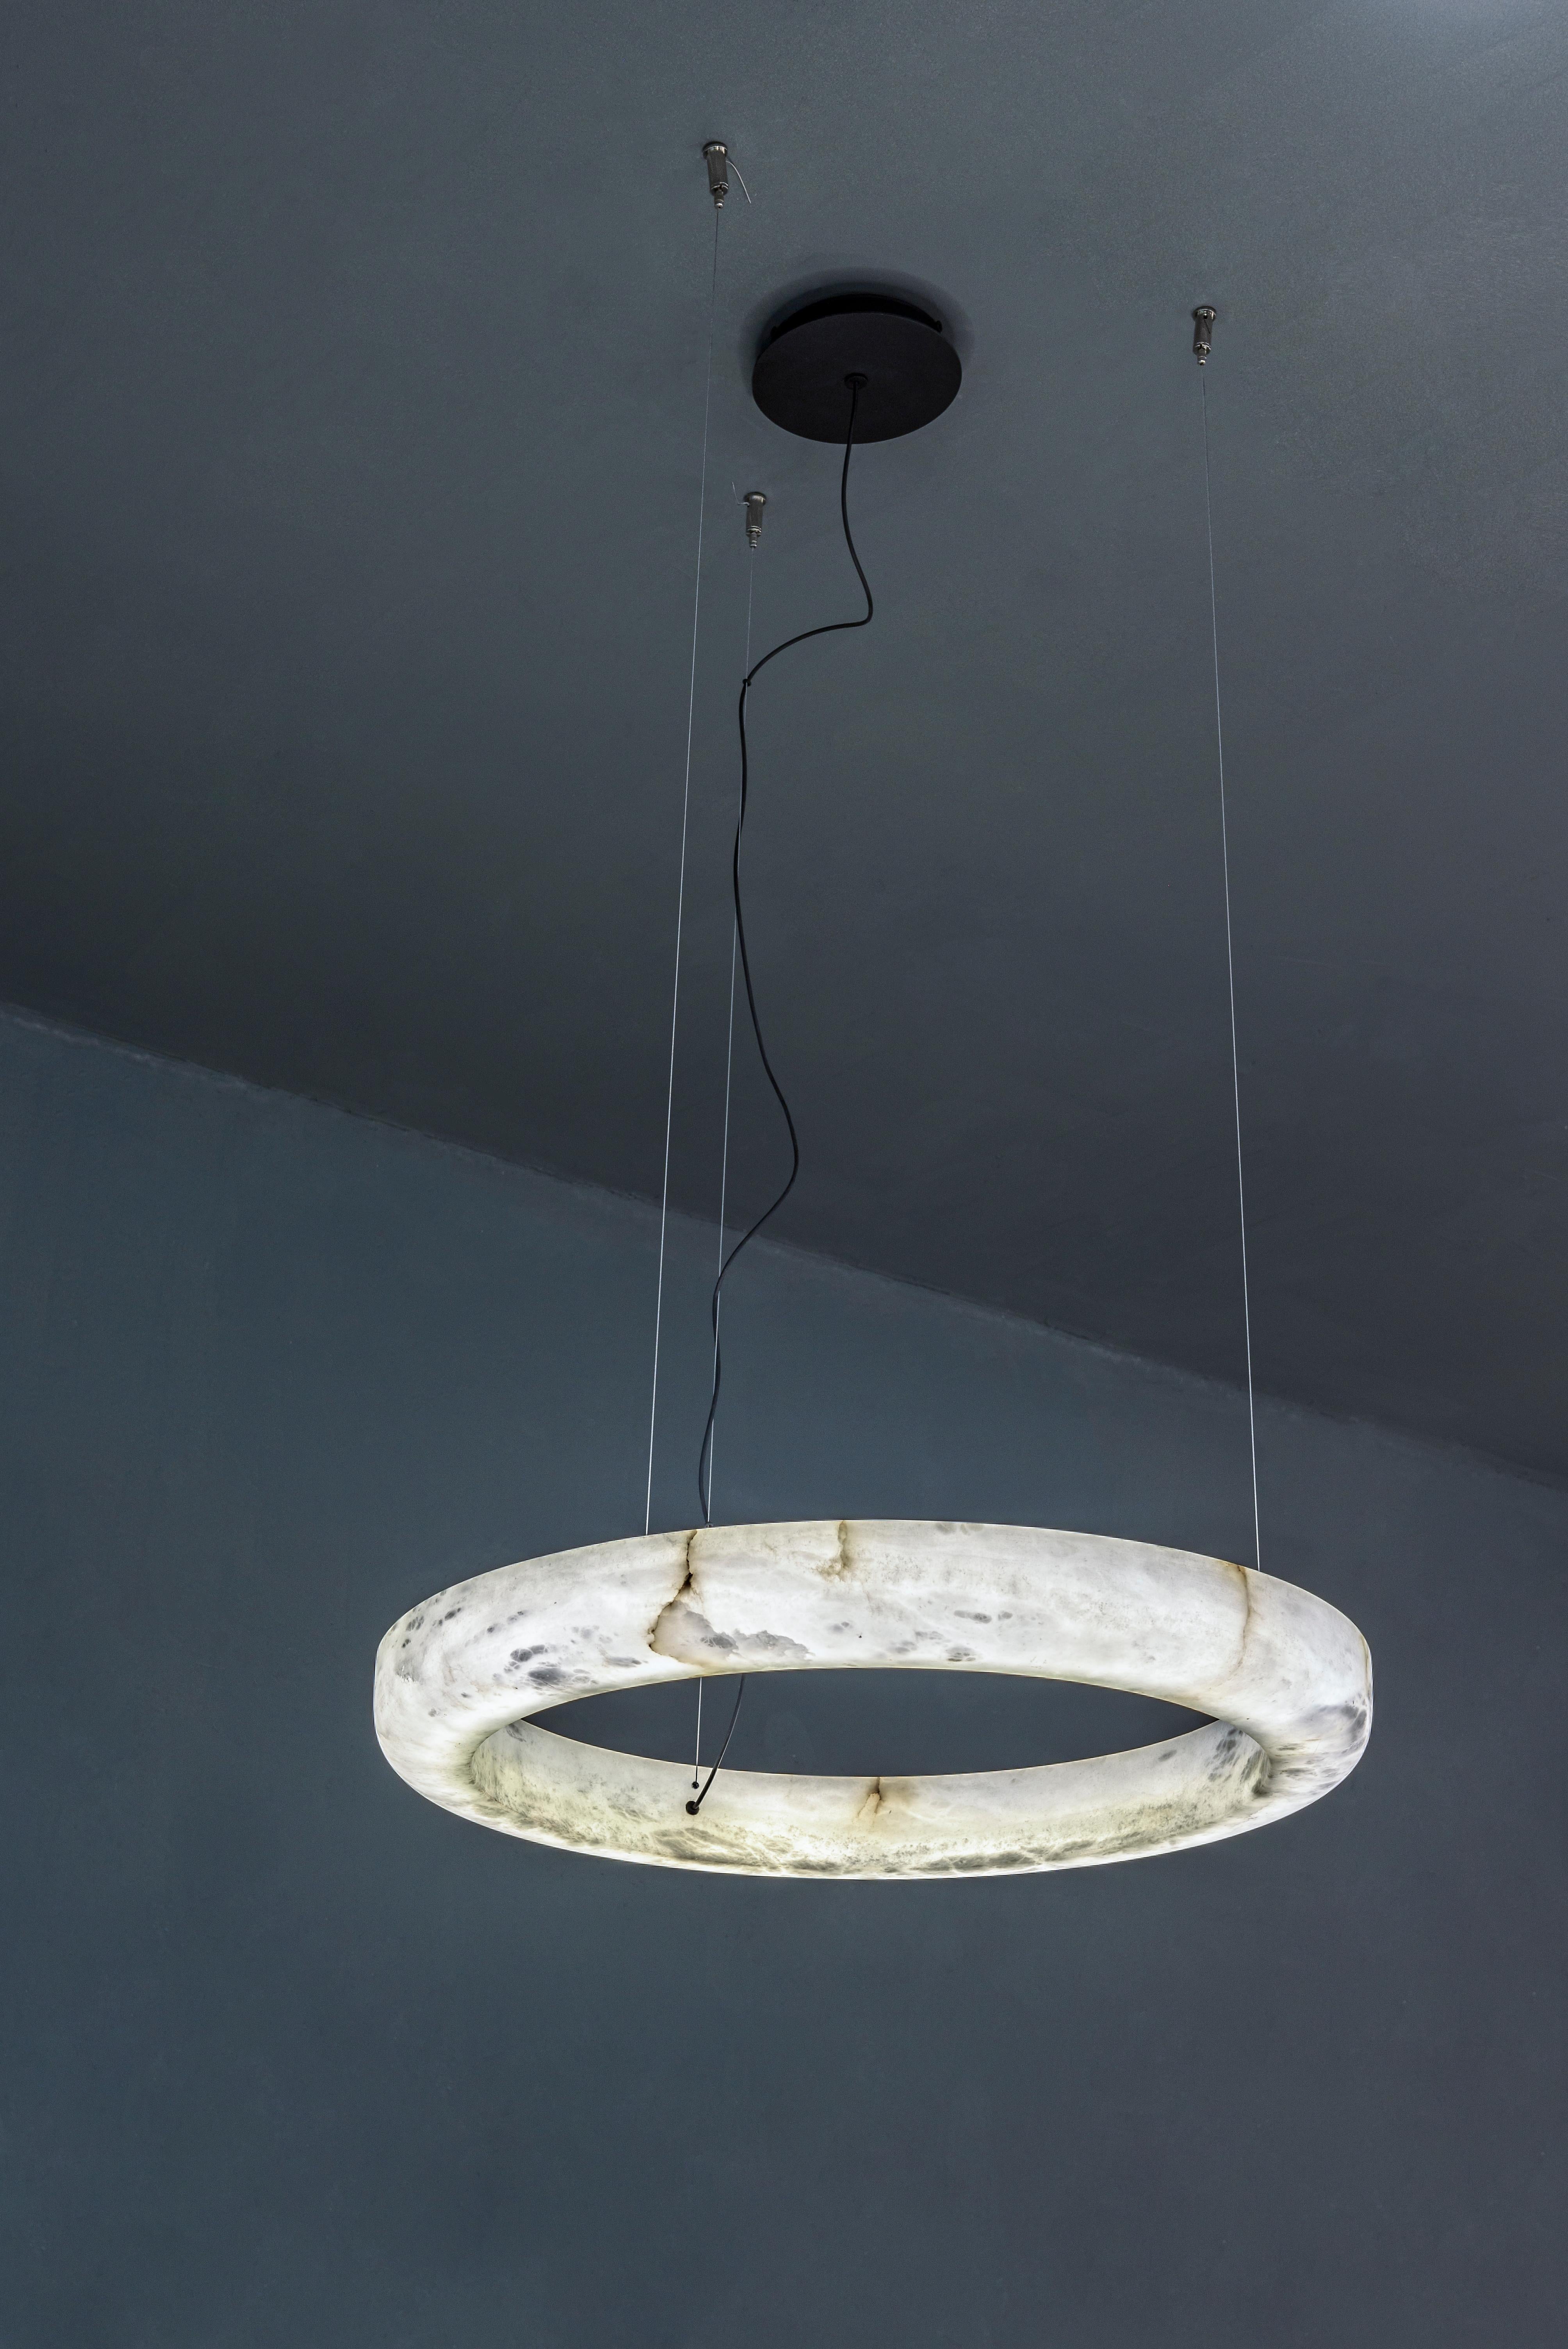 Ring 100 Pendant Lamp by United Alabaster
Dimensions: D 100 x H 200 cm
Materials: Alabaster

All our lamps can be wired according to each country. If sold to the USA it will be wired for the USA for instance.

A suspended alabaster ring with a